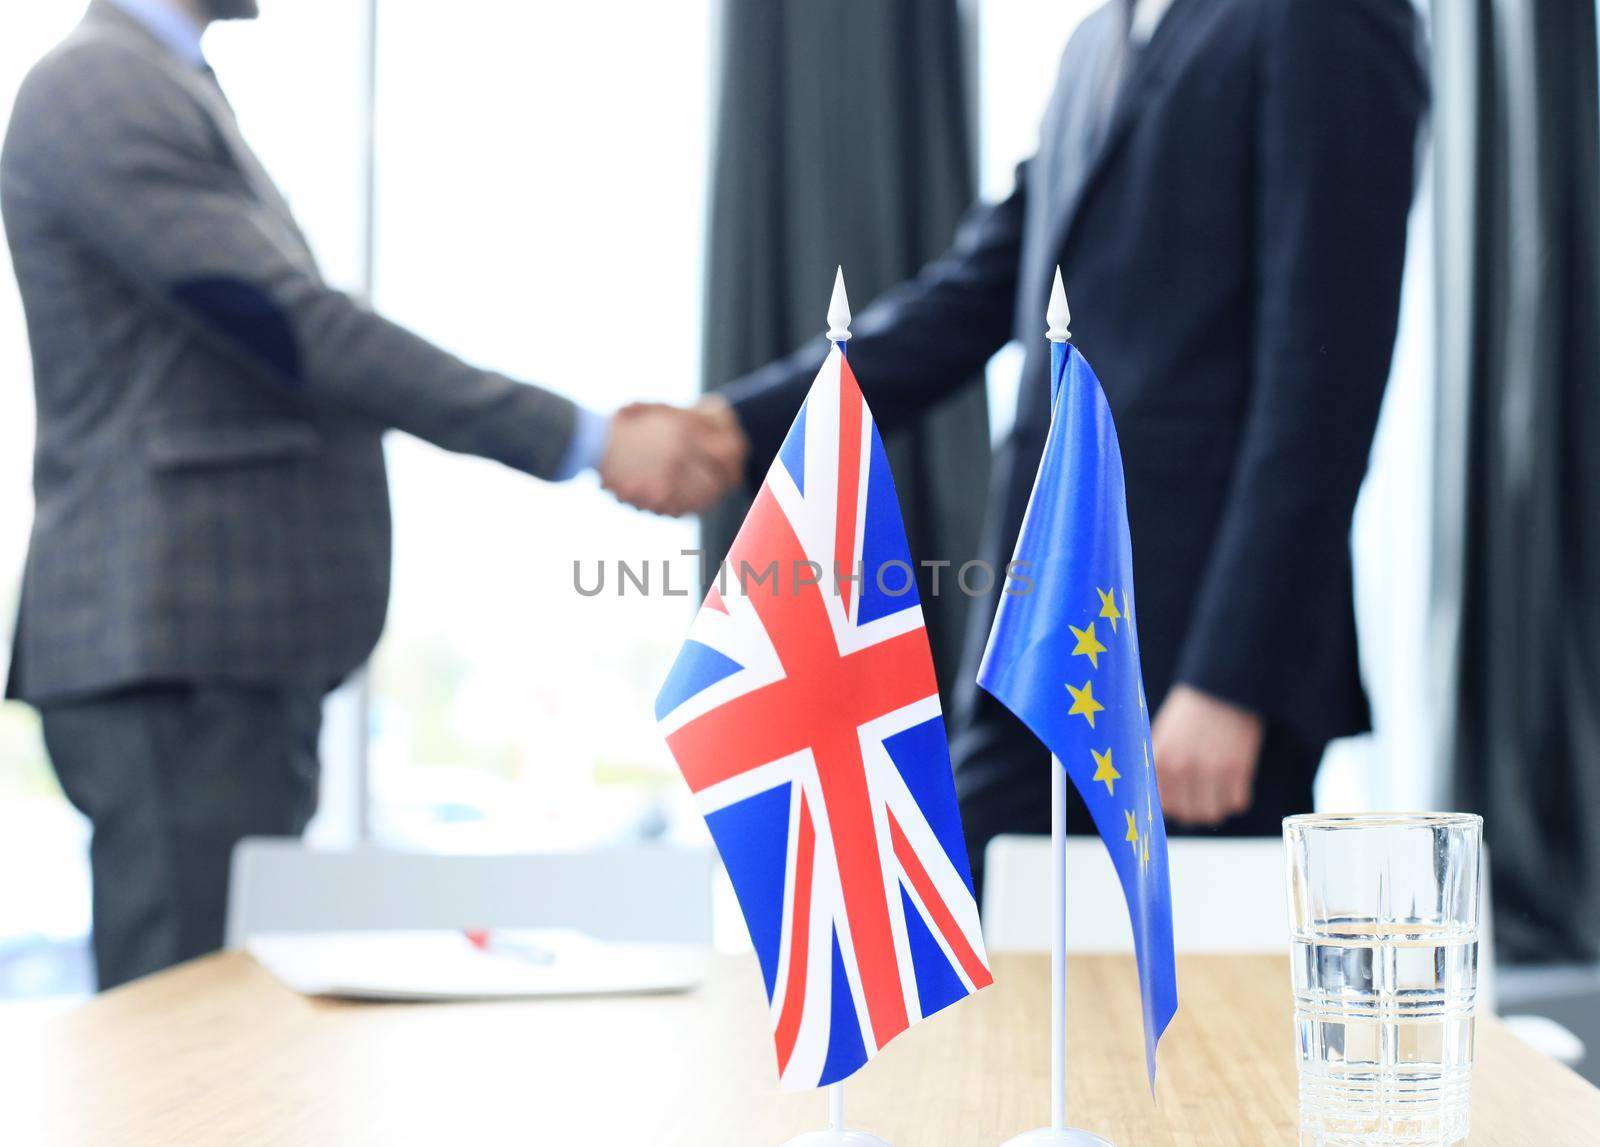 European Union and United Kingdom leaders shaking hands on a deal agreement. Brexit by tsyhun